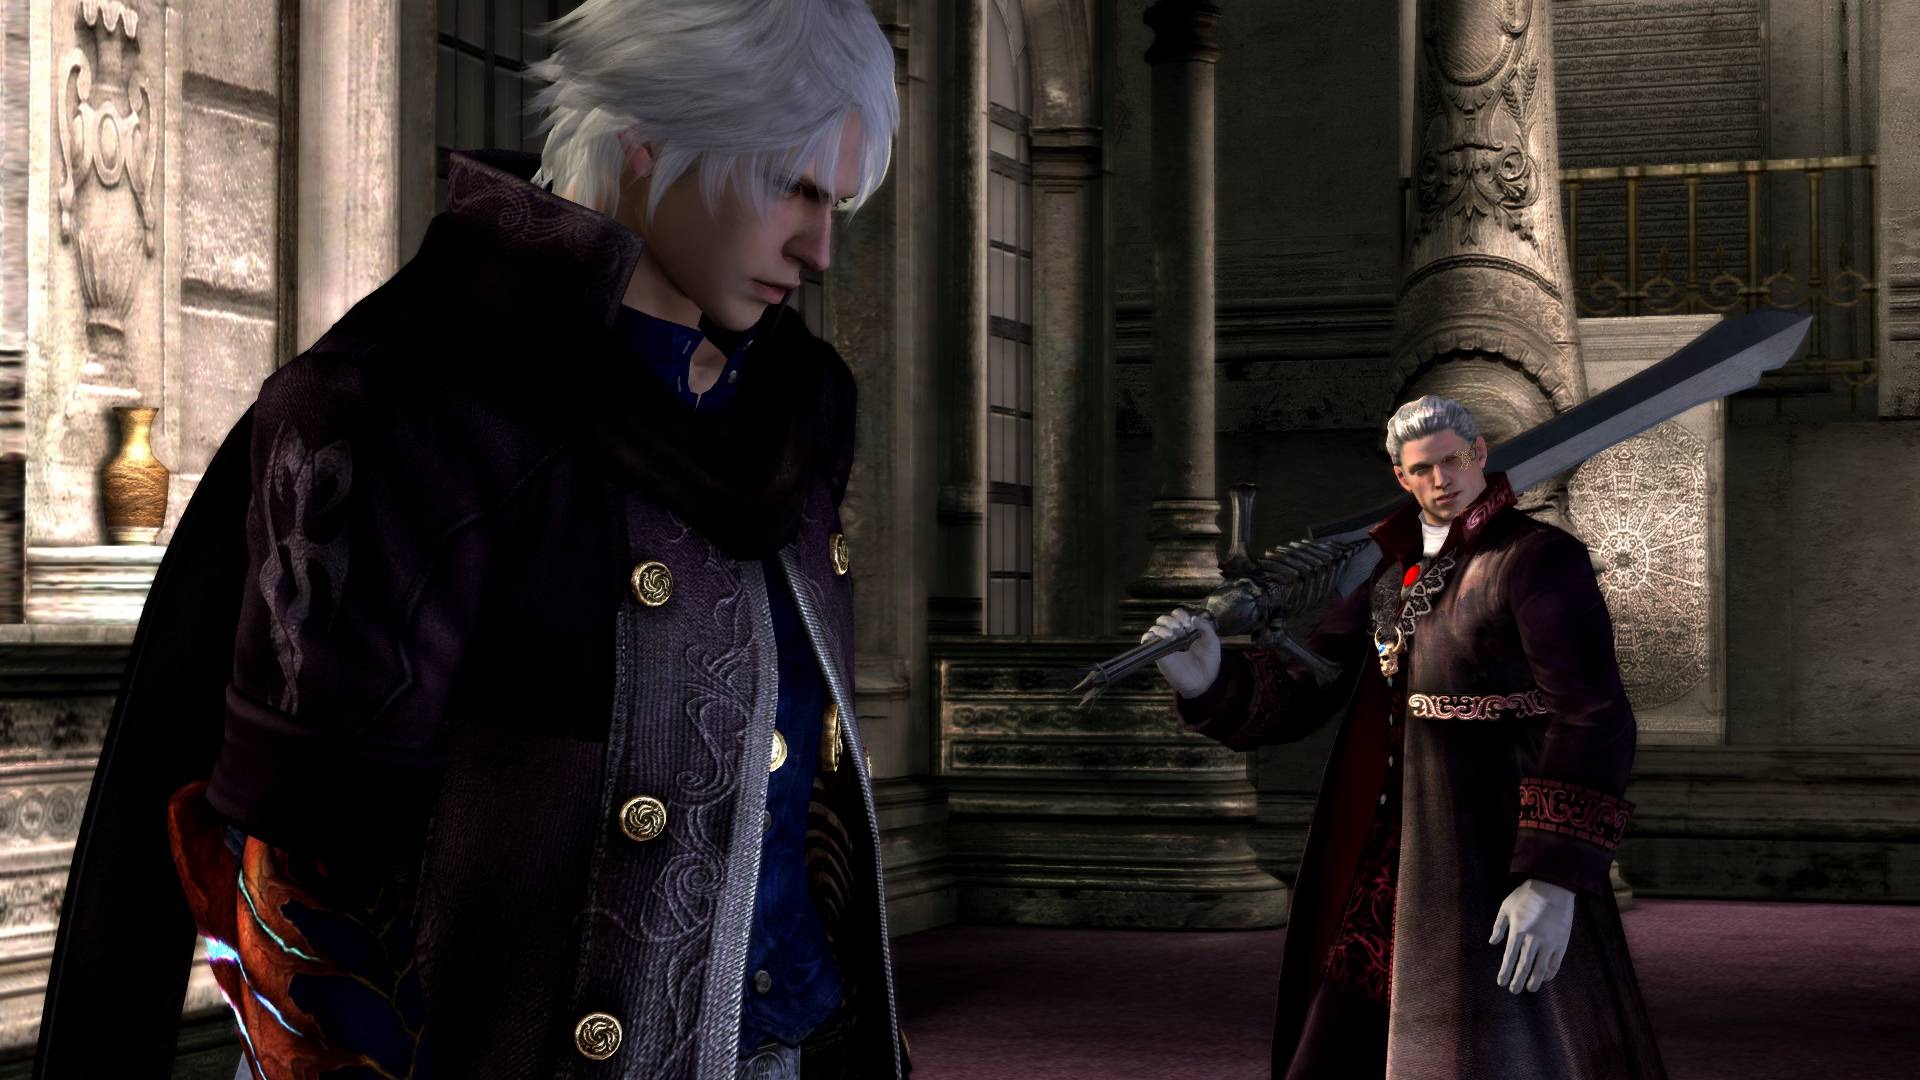 devil may cry 4 special edition vergil ending